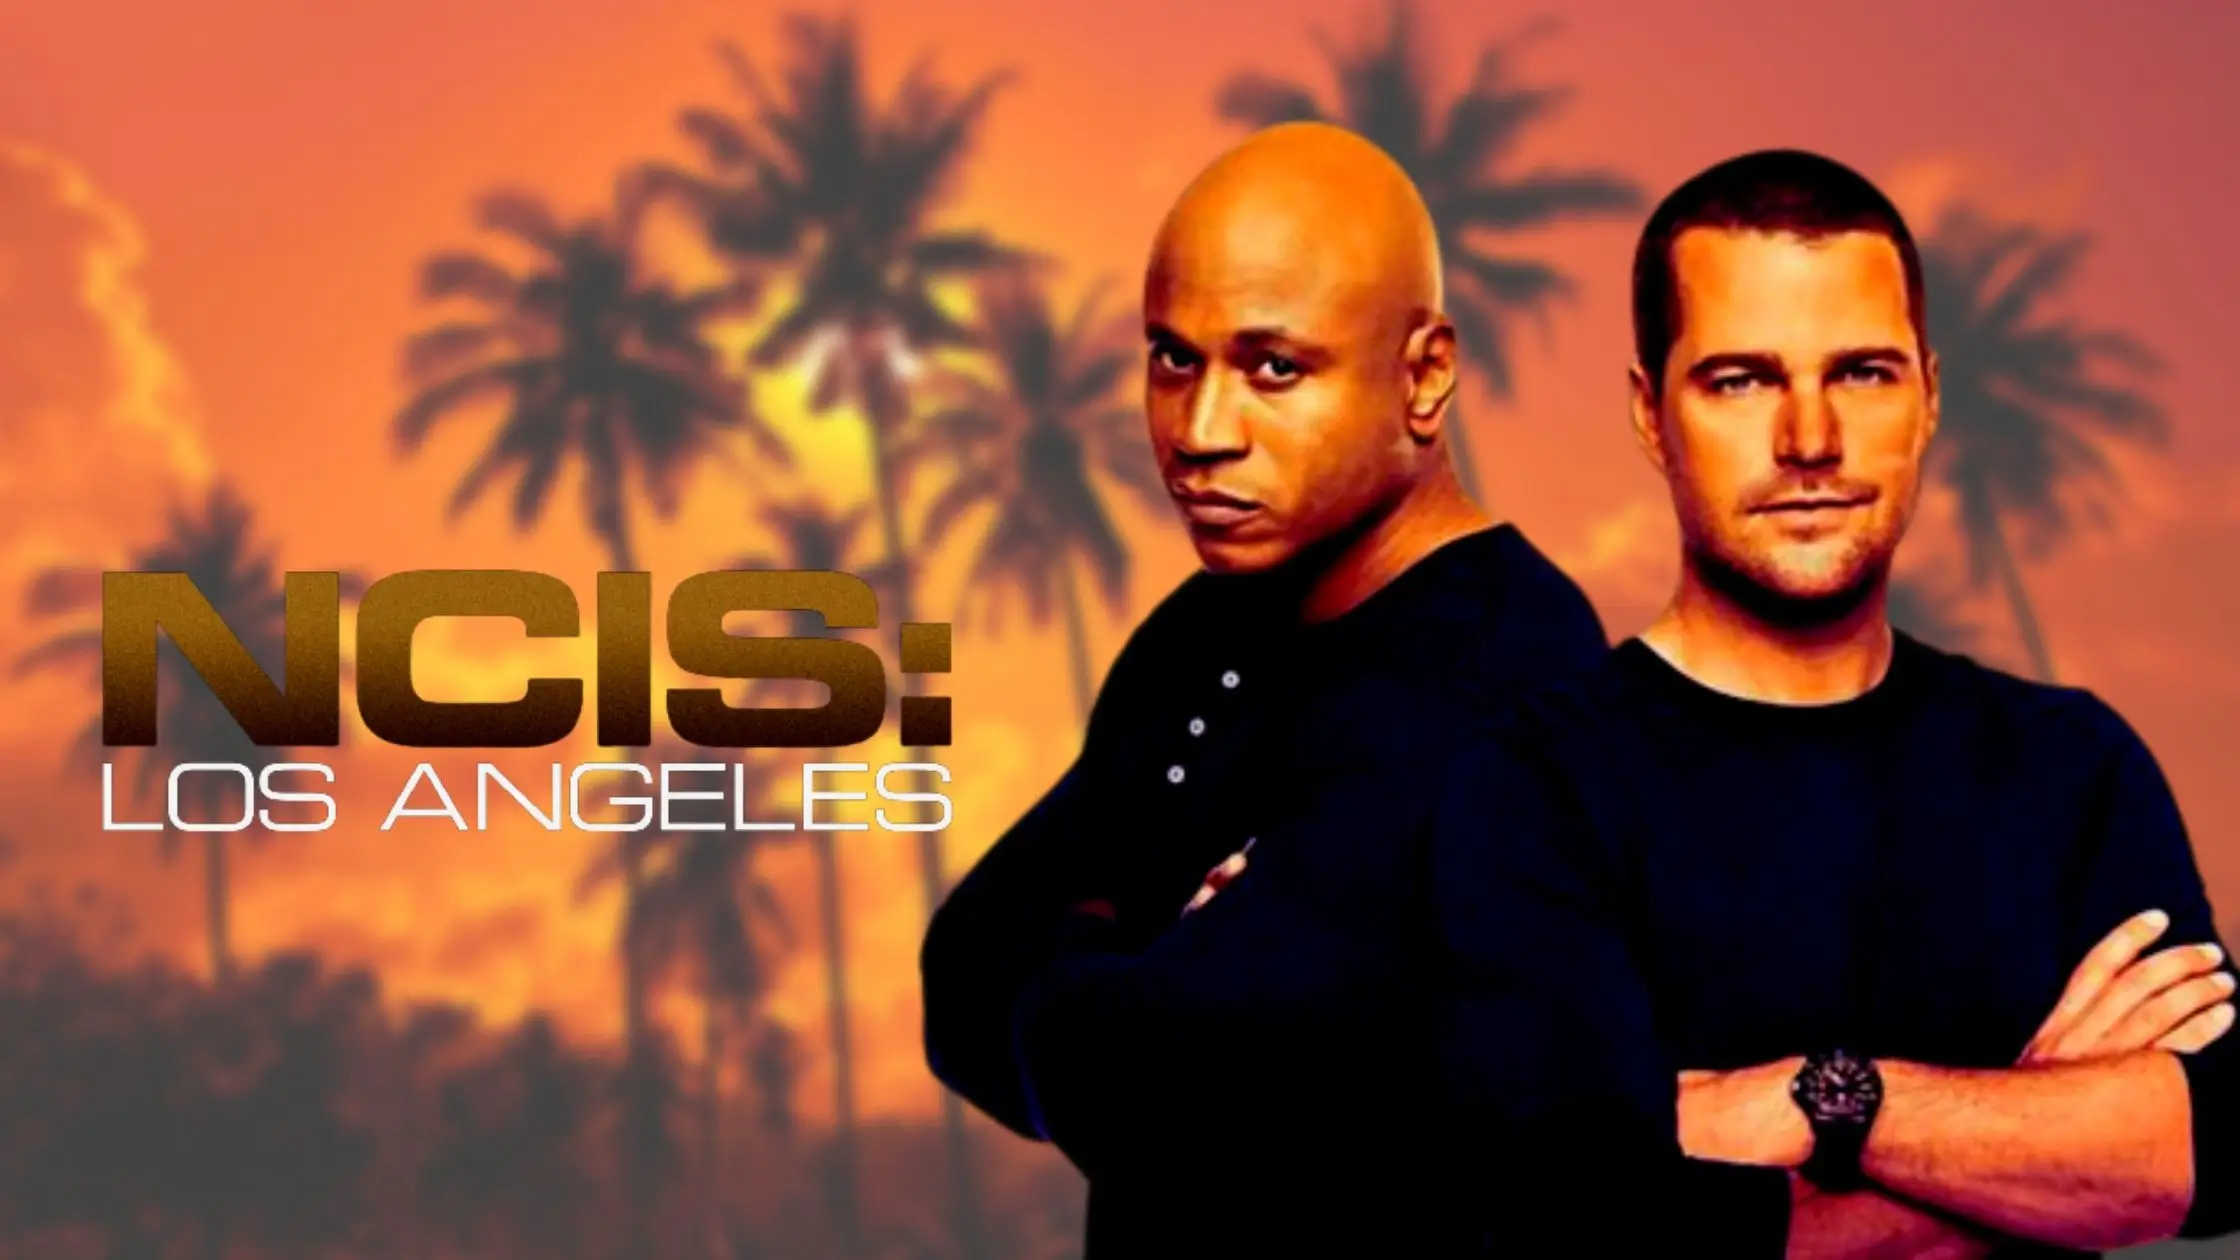 When Will CBS Air The 9th Episode Of Season 14 Of NCIS Los Angeles